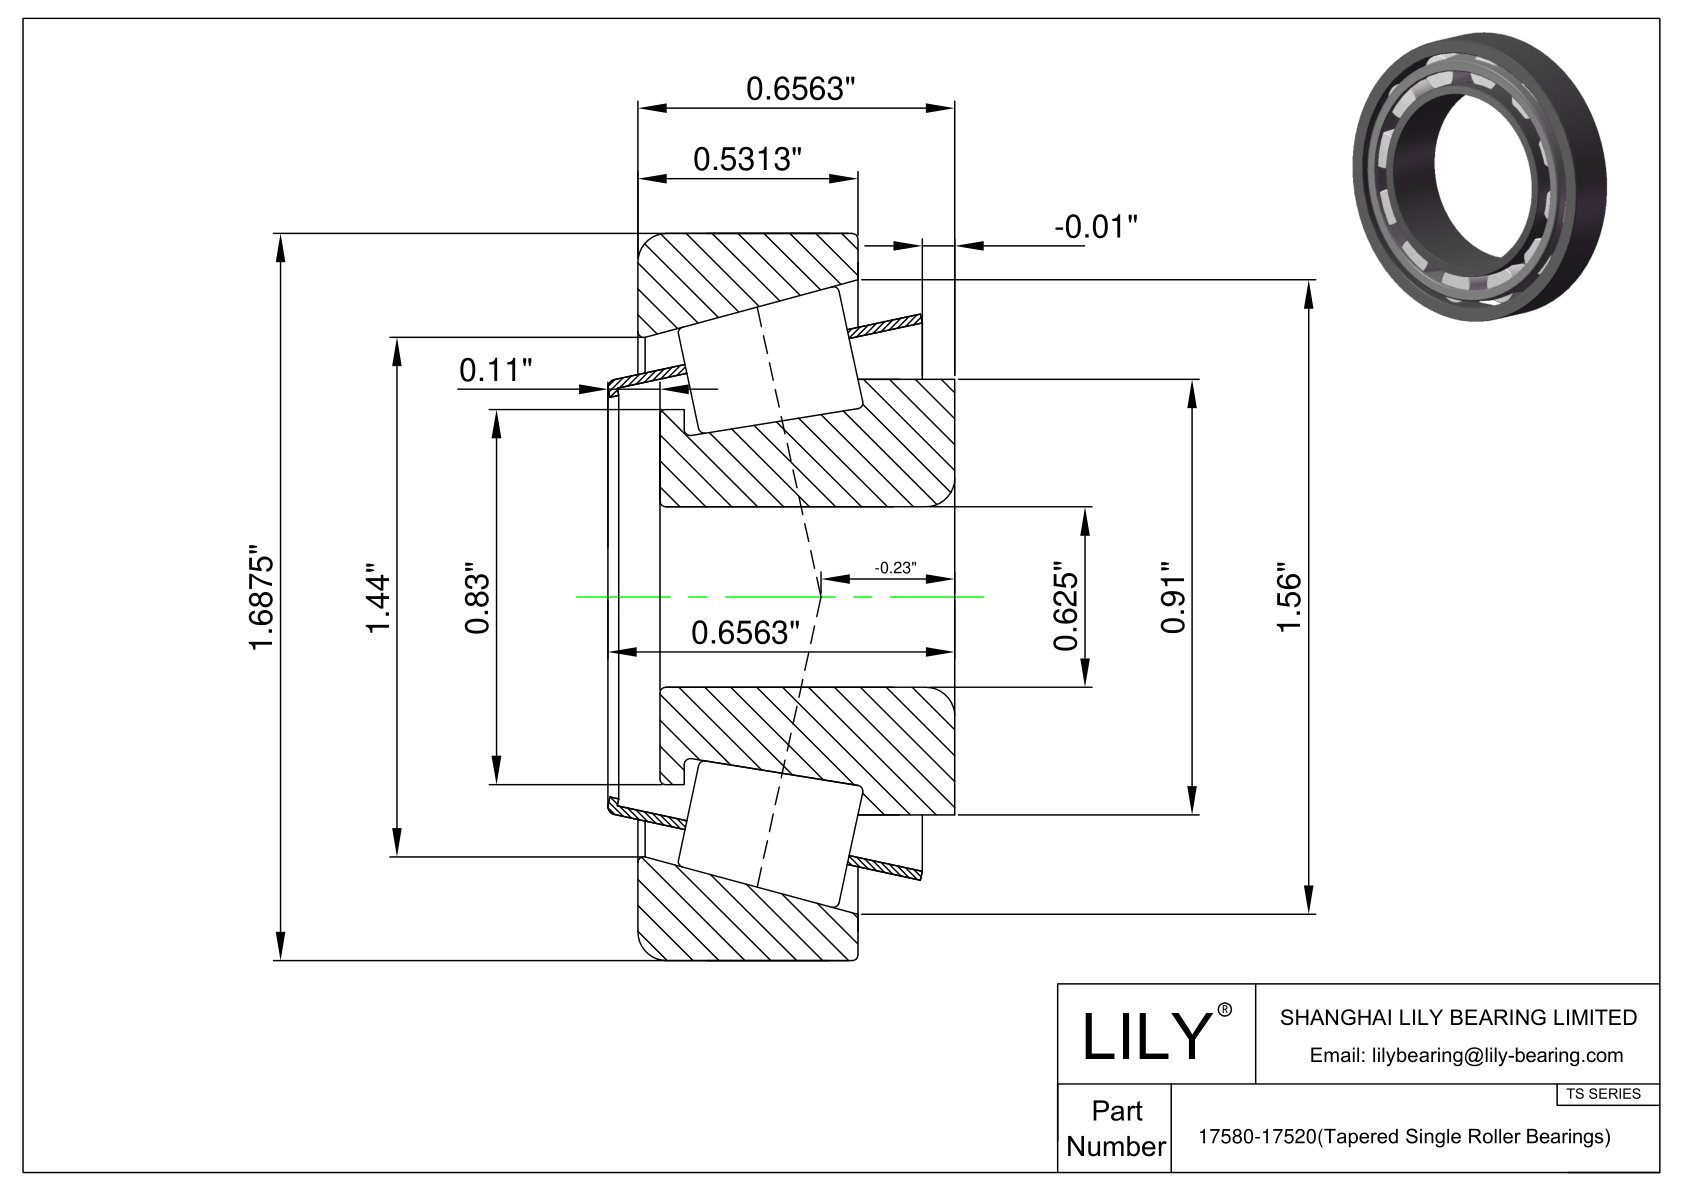 17580-17520 TS (Tapered Single Roller Bearings) (Imperial) cad drawing